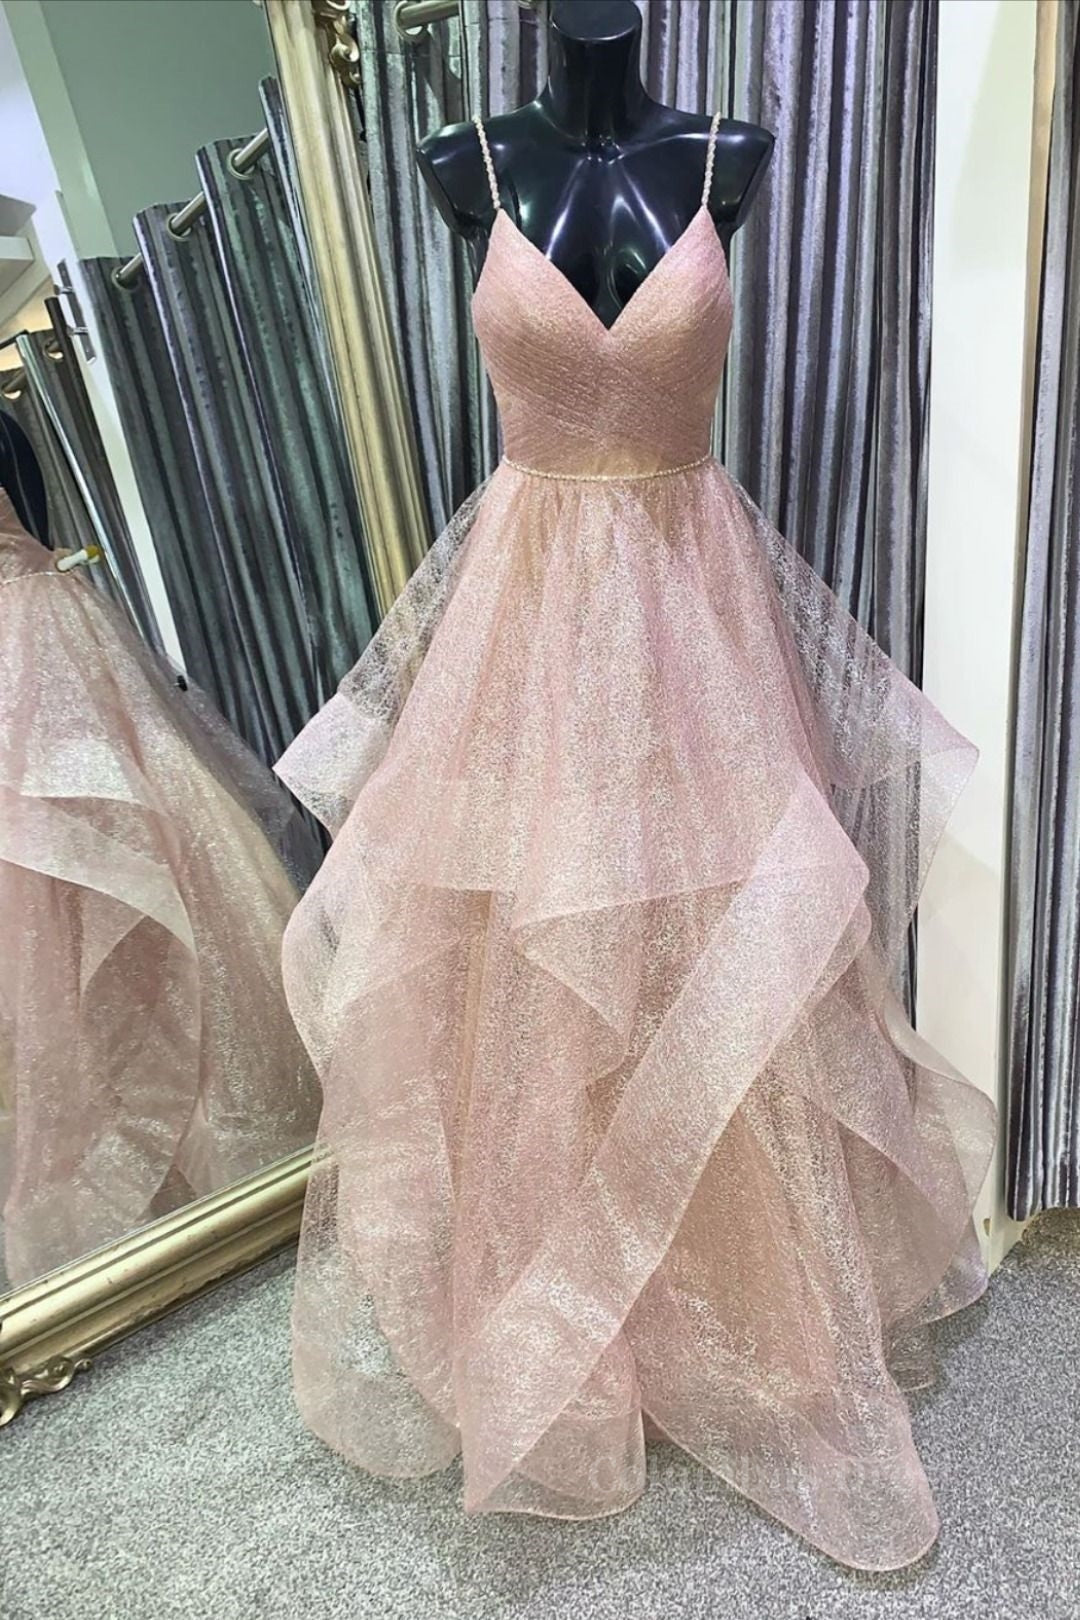 Stylish V Neck Backless Rose Gold Long Corset Prom Dress, Backless Rose Gold Corset Formal Dress, Fluffy Rose Gold Evening Dress outfit, Casual Gown